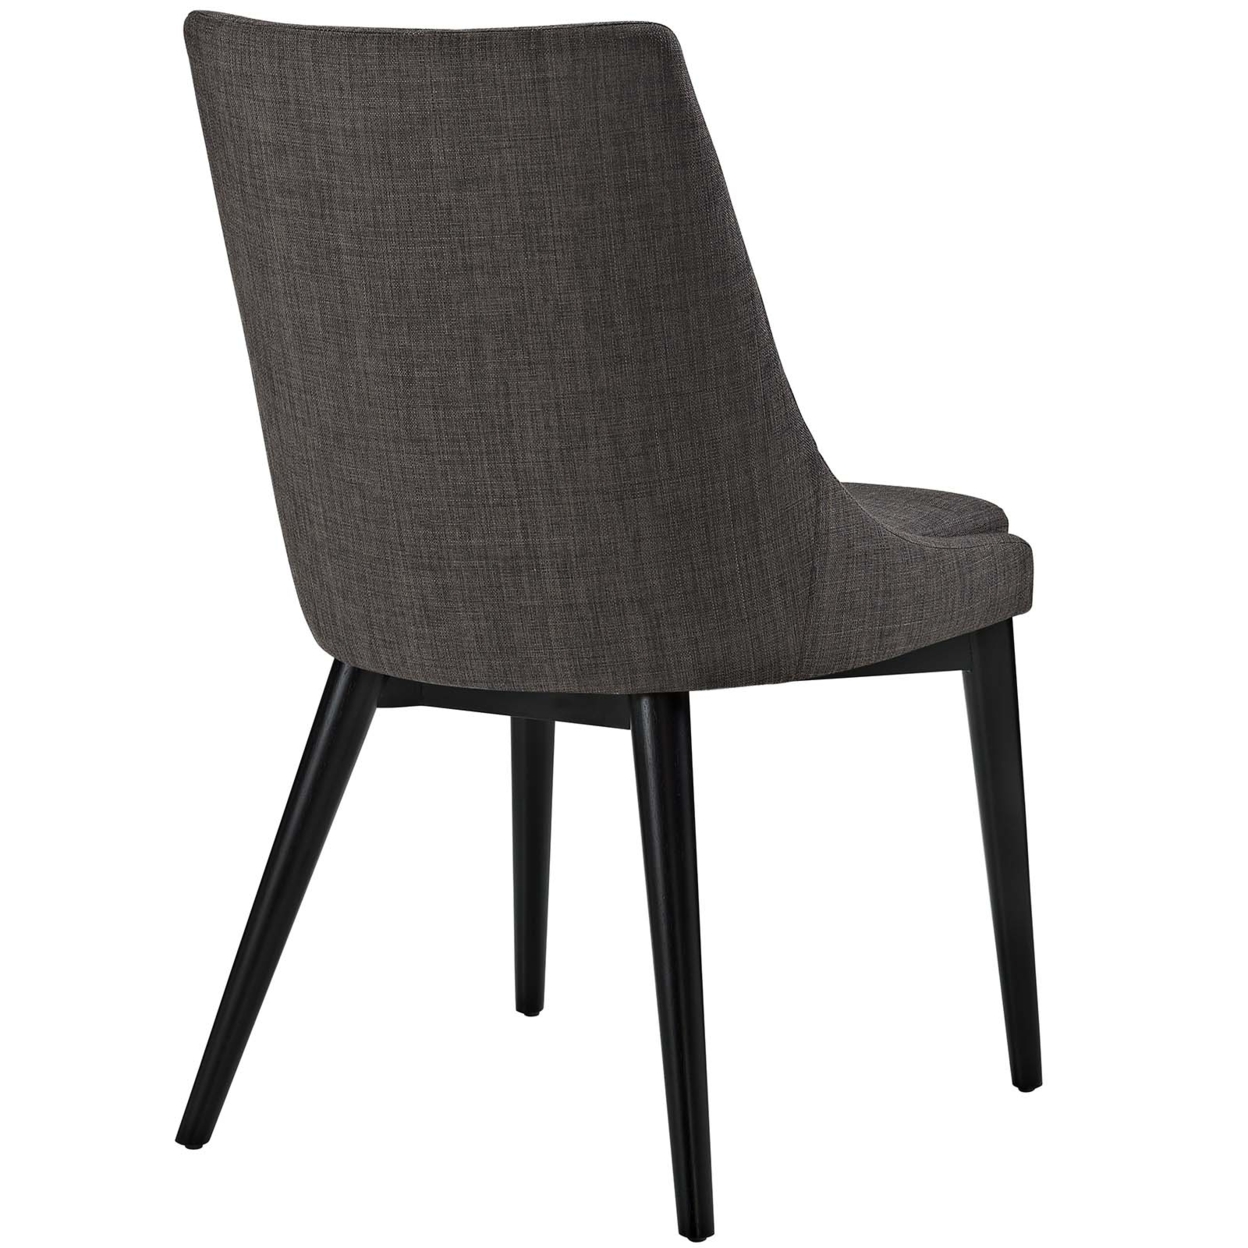 Viscount Fabric Dining Chair, Brown